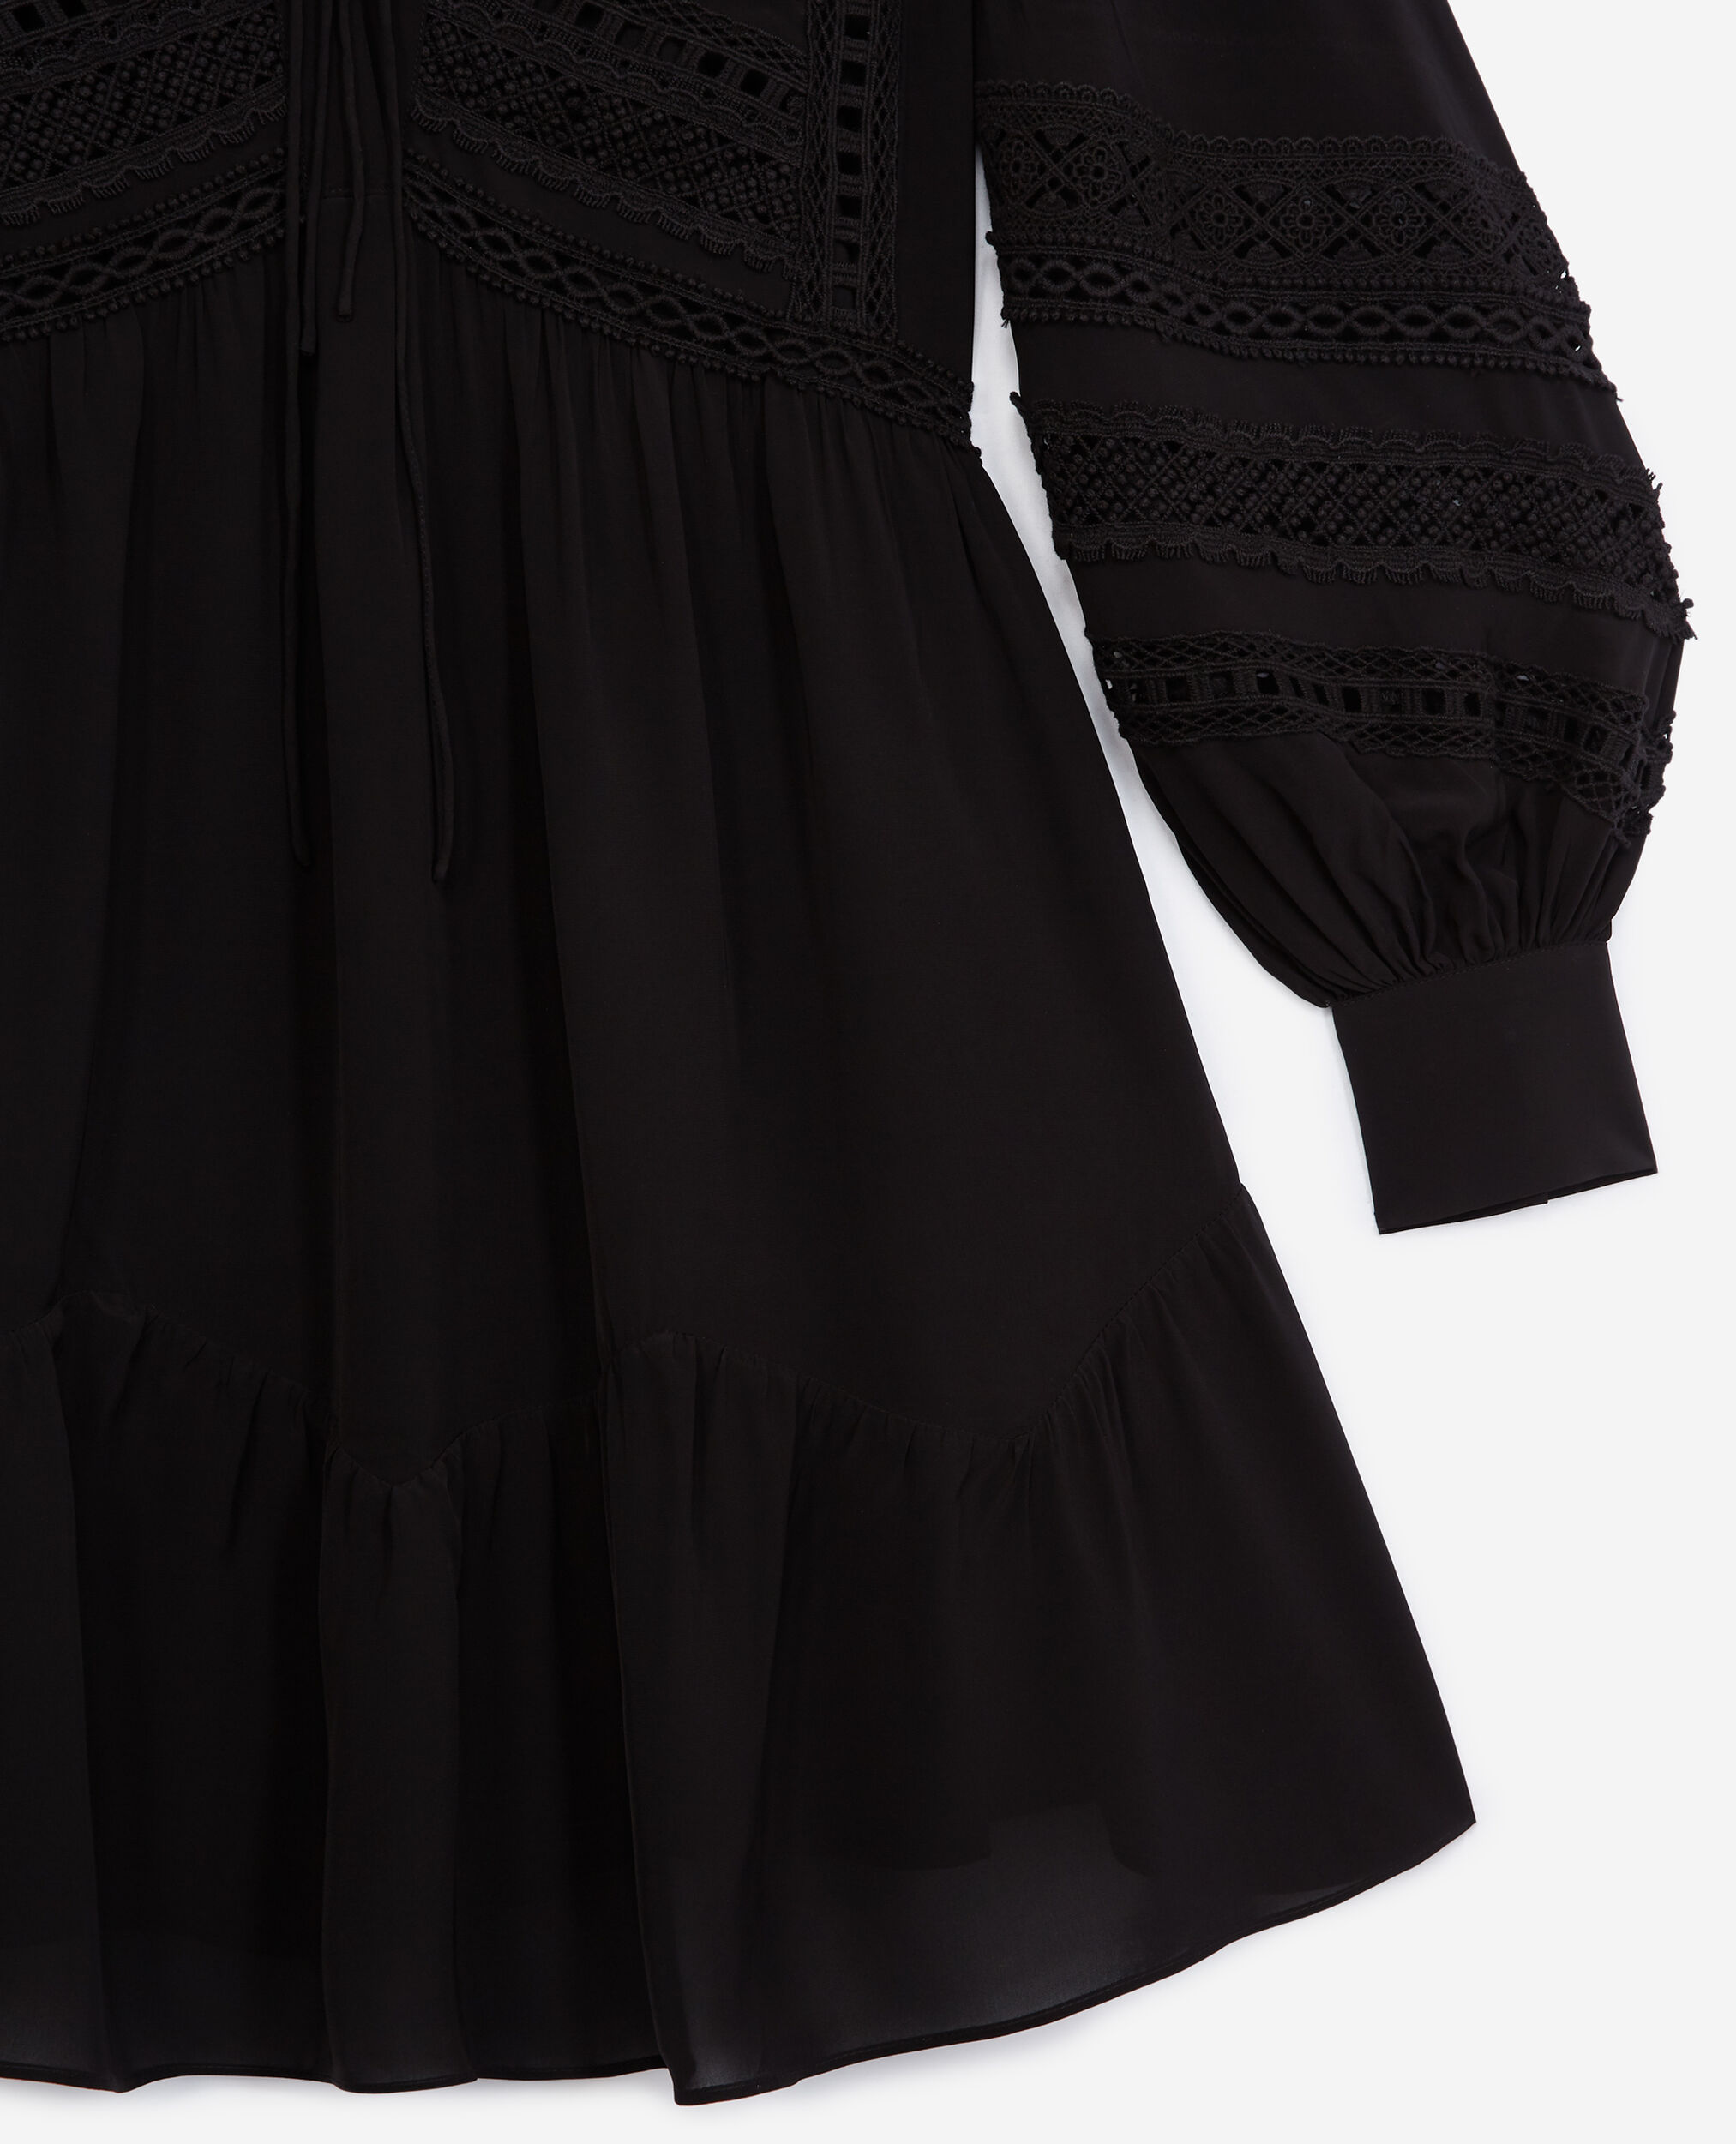 Short black dress with lace detail | The Kooples